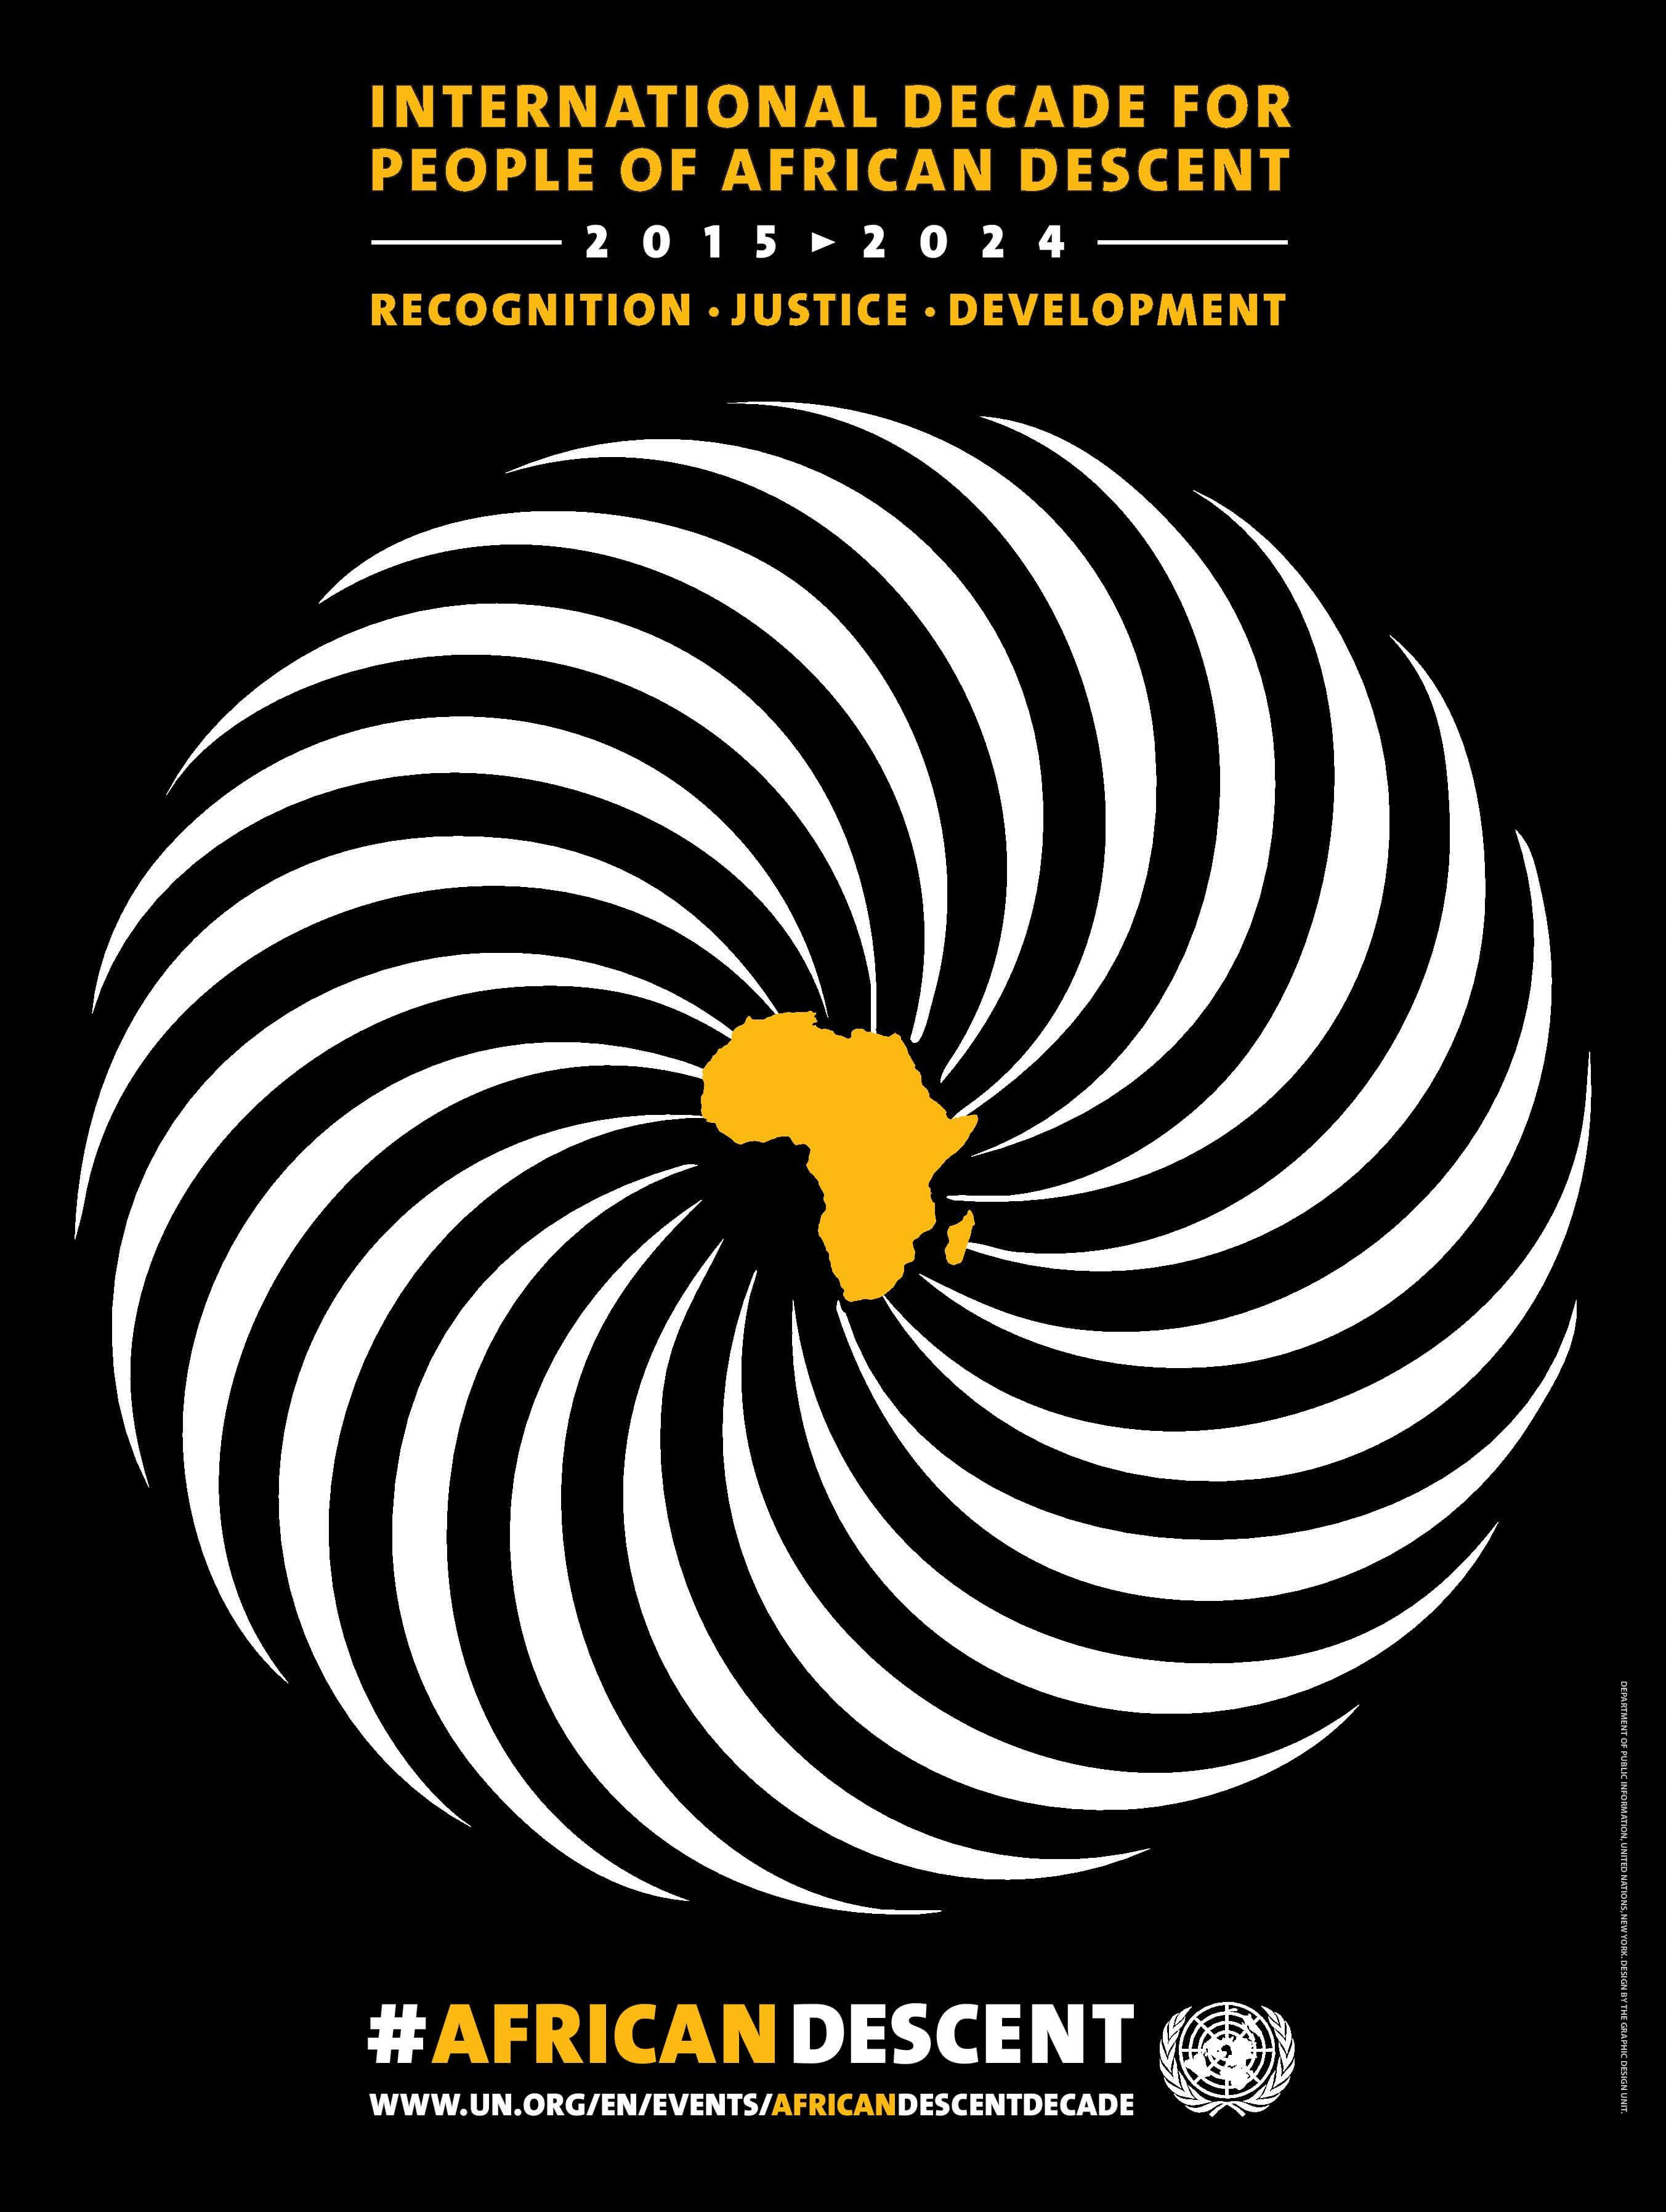 International Decade for People of African Descent (2015-2024)